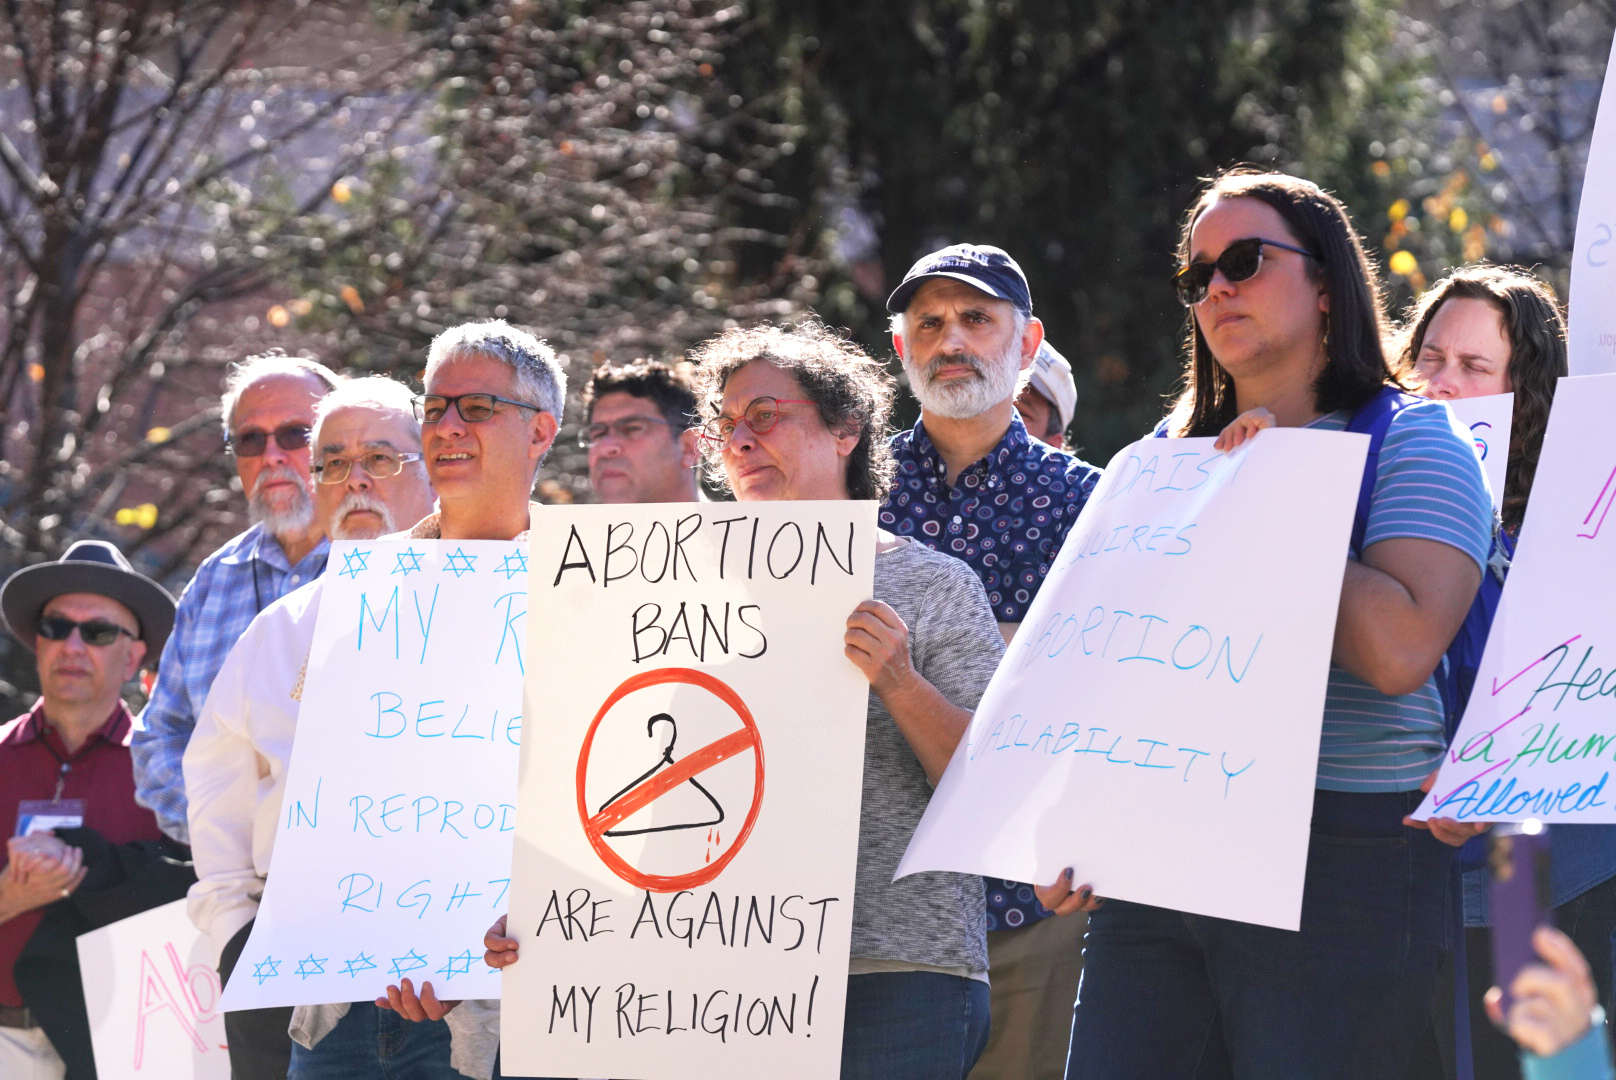 A group of one hundred rabbis joined together with a variety of signs as part of a rally for reproductive rights on Wednesday, Nov. 9, in St. Louis, Missouri’s Memorial Park Plaza. The rabbis were part of the Conservative movement’s Rabbinical Assembly. Photo courtesy The Rabbinical Assembly